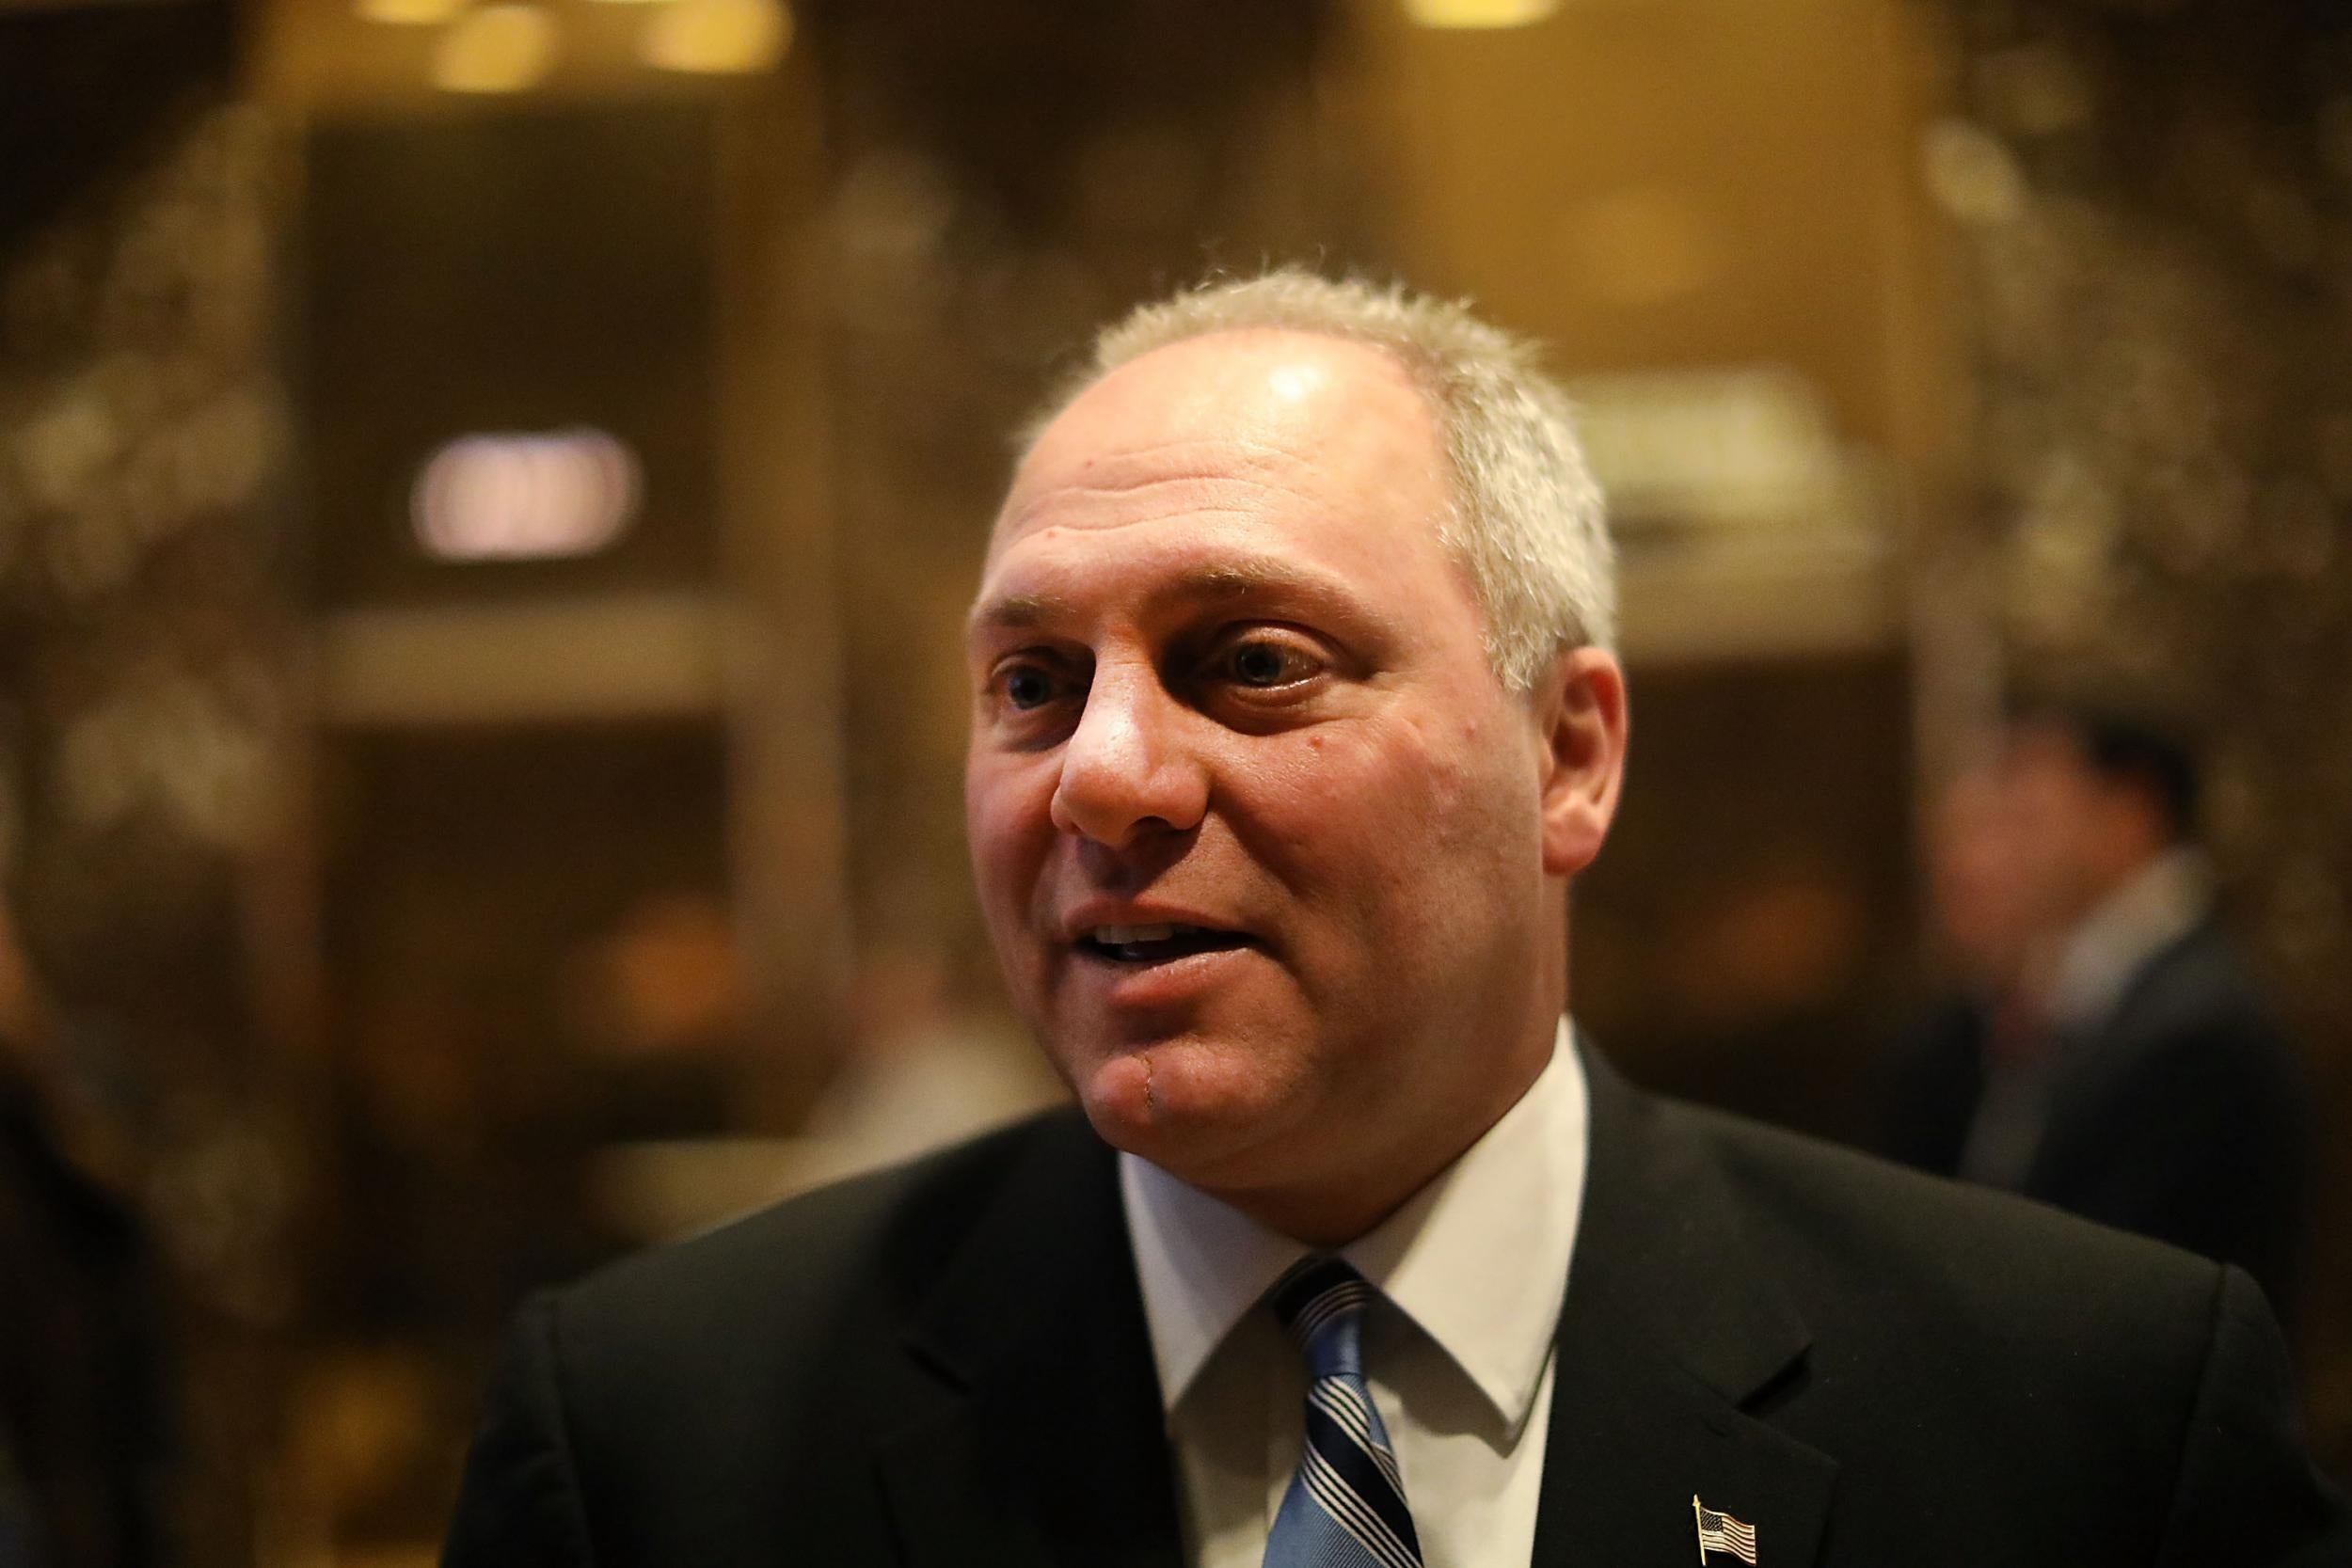 Representative Steve Scalise was admitted to the hospital following a mass shooting at a Congressional baseball practise